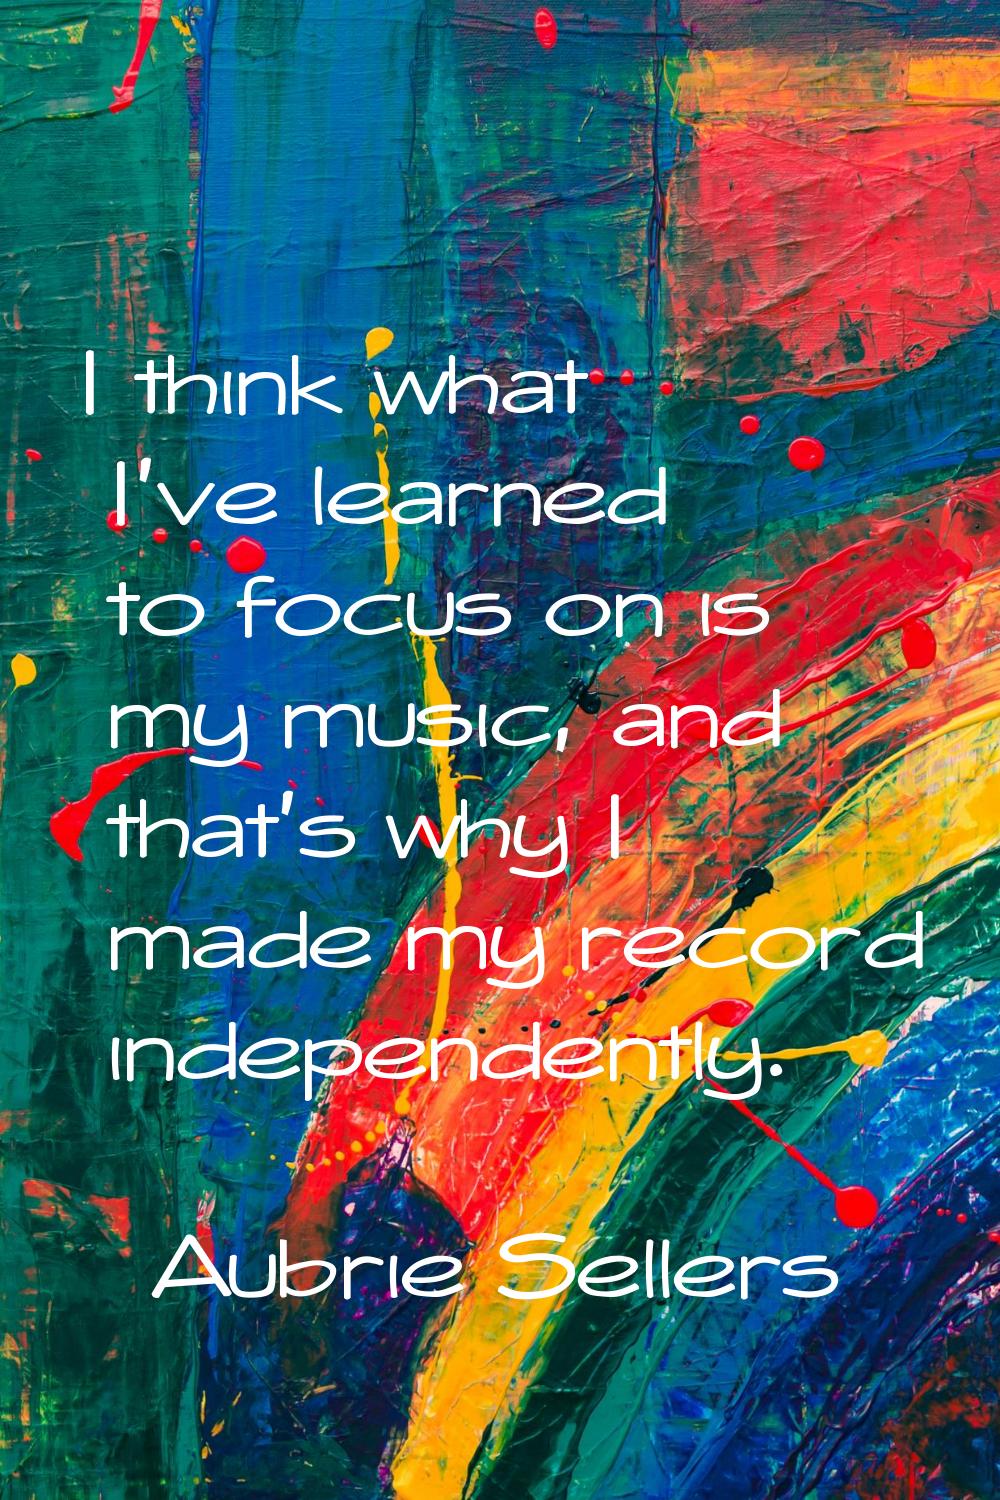 I think what I've learned to focus on is my music, and that's why I made my record independently.